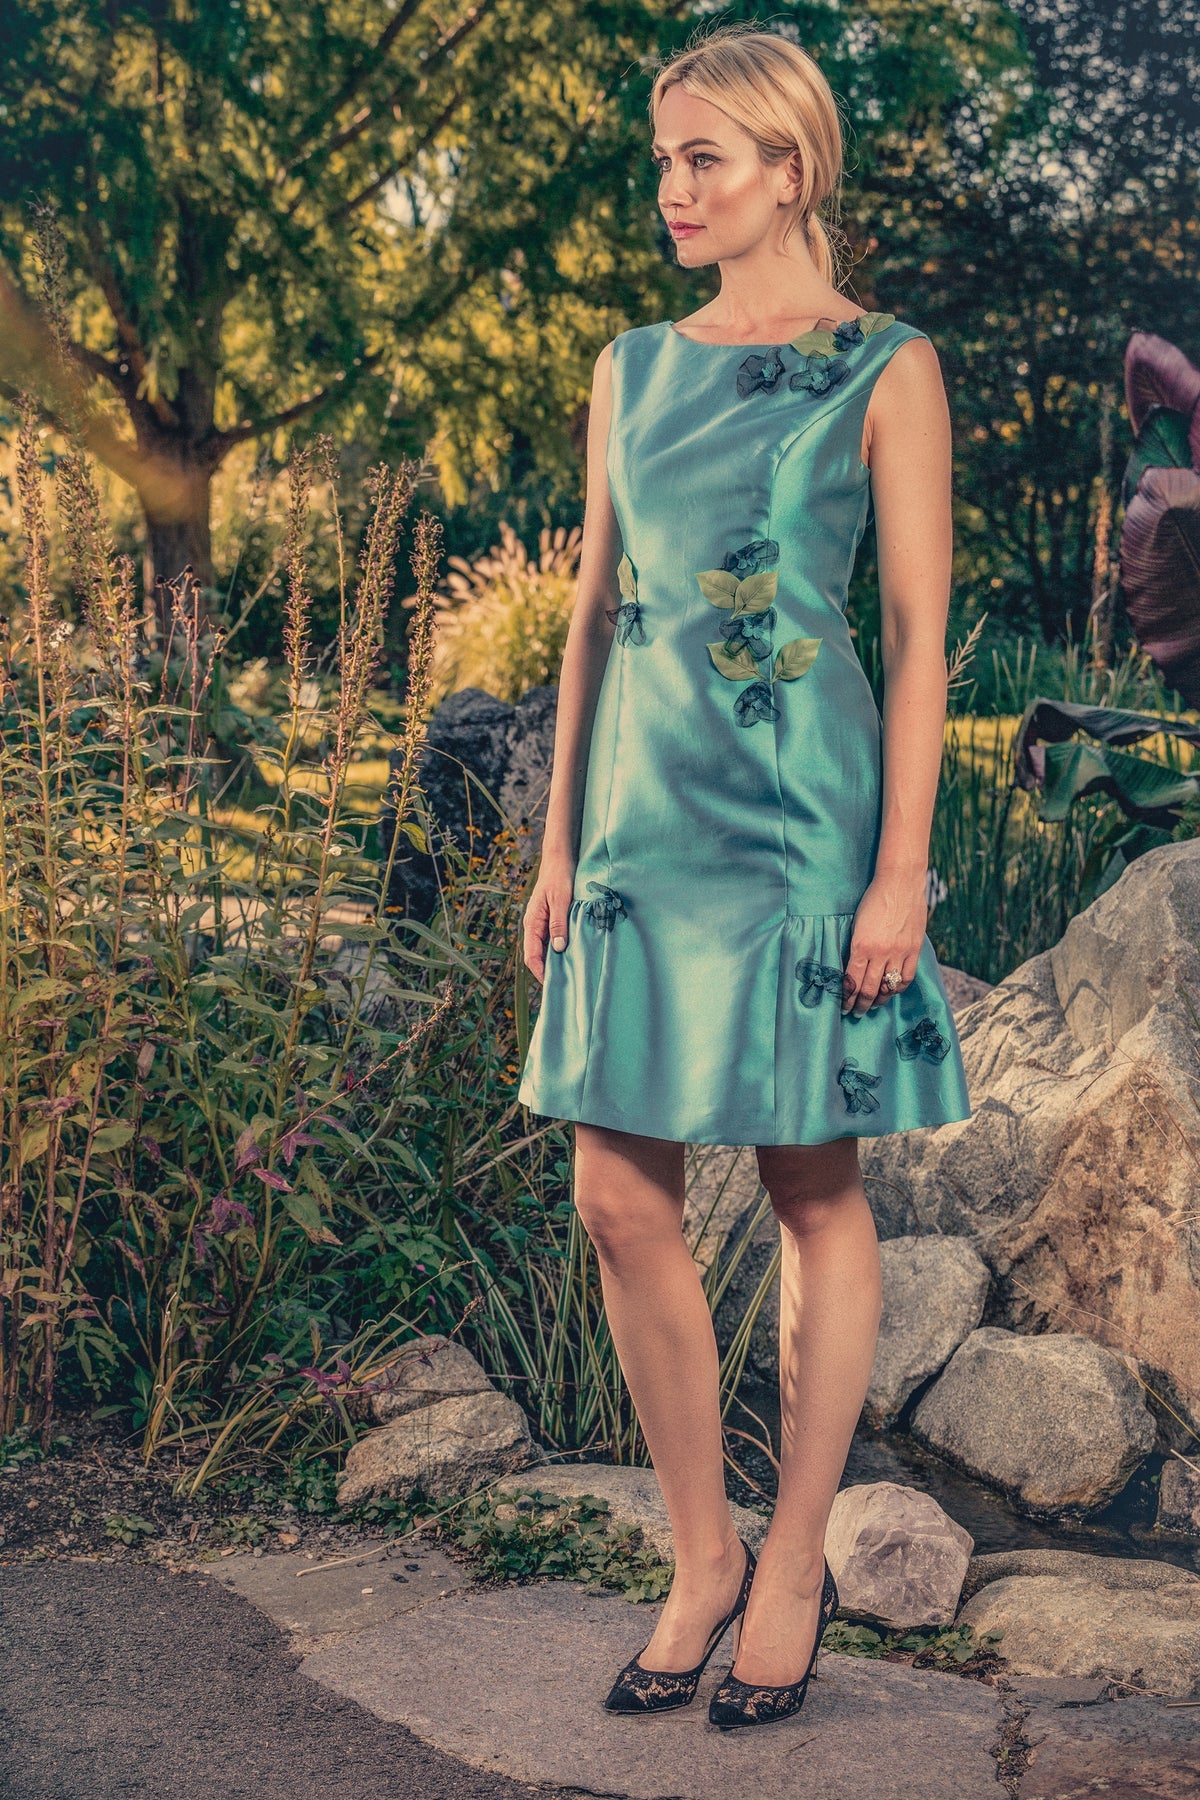 anna nieman designer dress Boston. A little turquoise dress, embroidered with black french tulle, and green leaves.